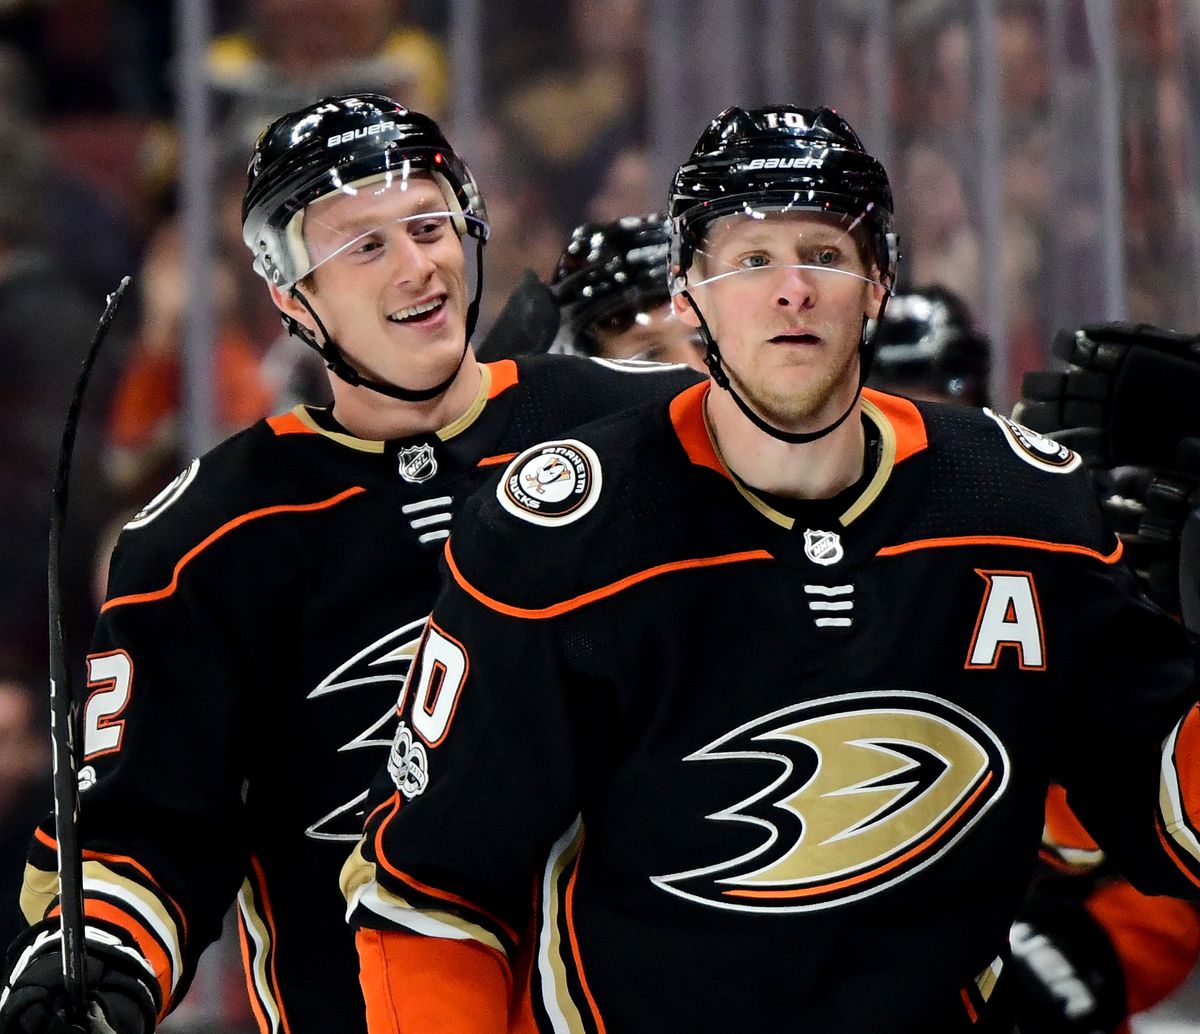 ANAHEIM, CA - NOVEMBER 15:  Josh Manson #42 of the Anaheim Ducks reacts to his goal behind Corey Perry #10, to take a 2-1 lead over the Boston Bruins during the second period at Honda Center on November 15, 2017 in Anaheim, California.  (Photo by Harry How/Getty Images)